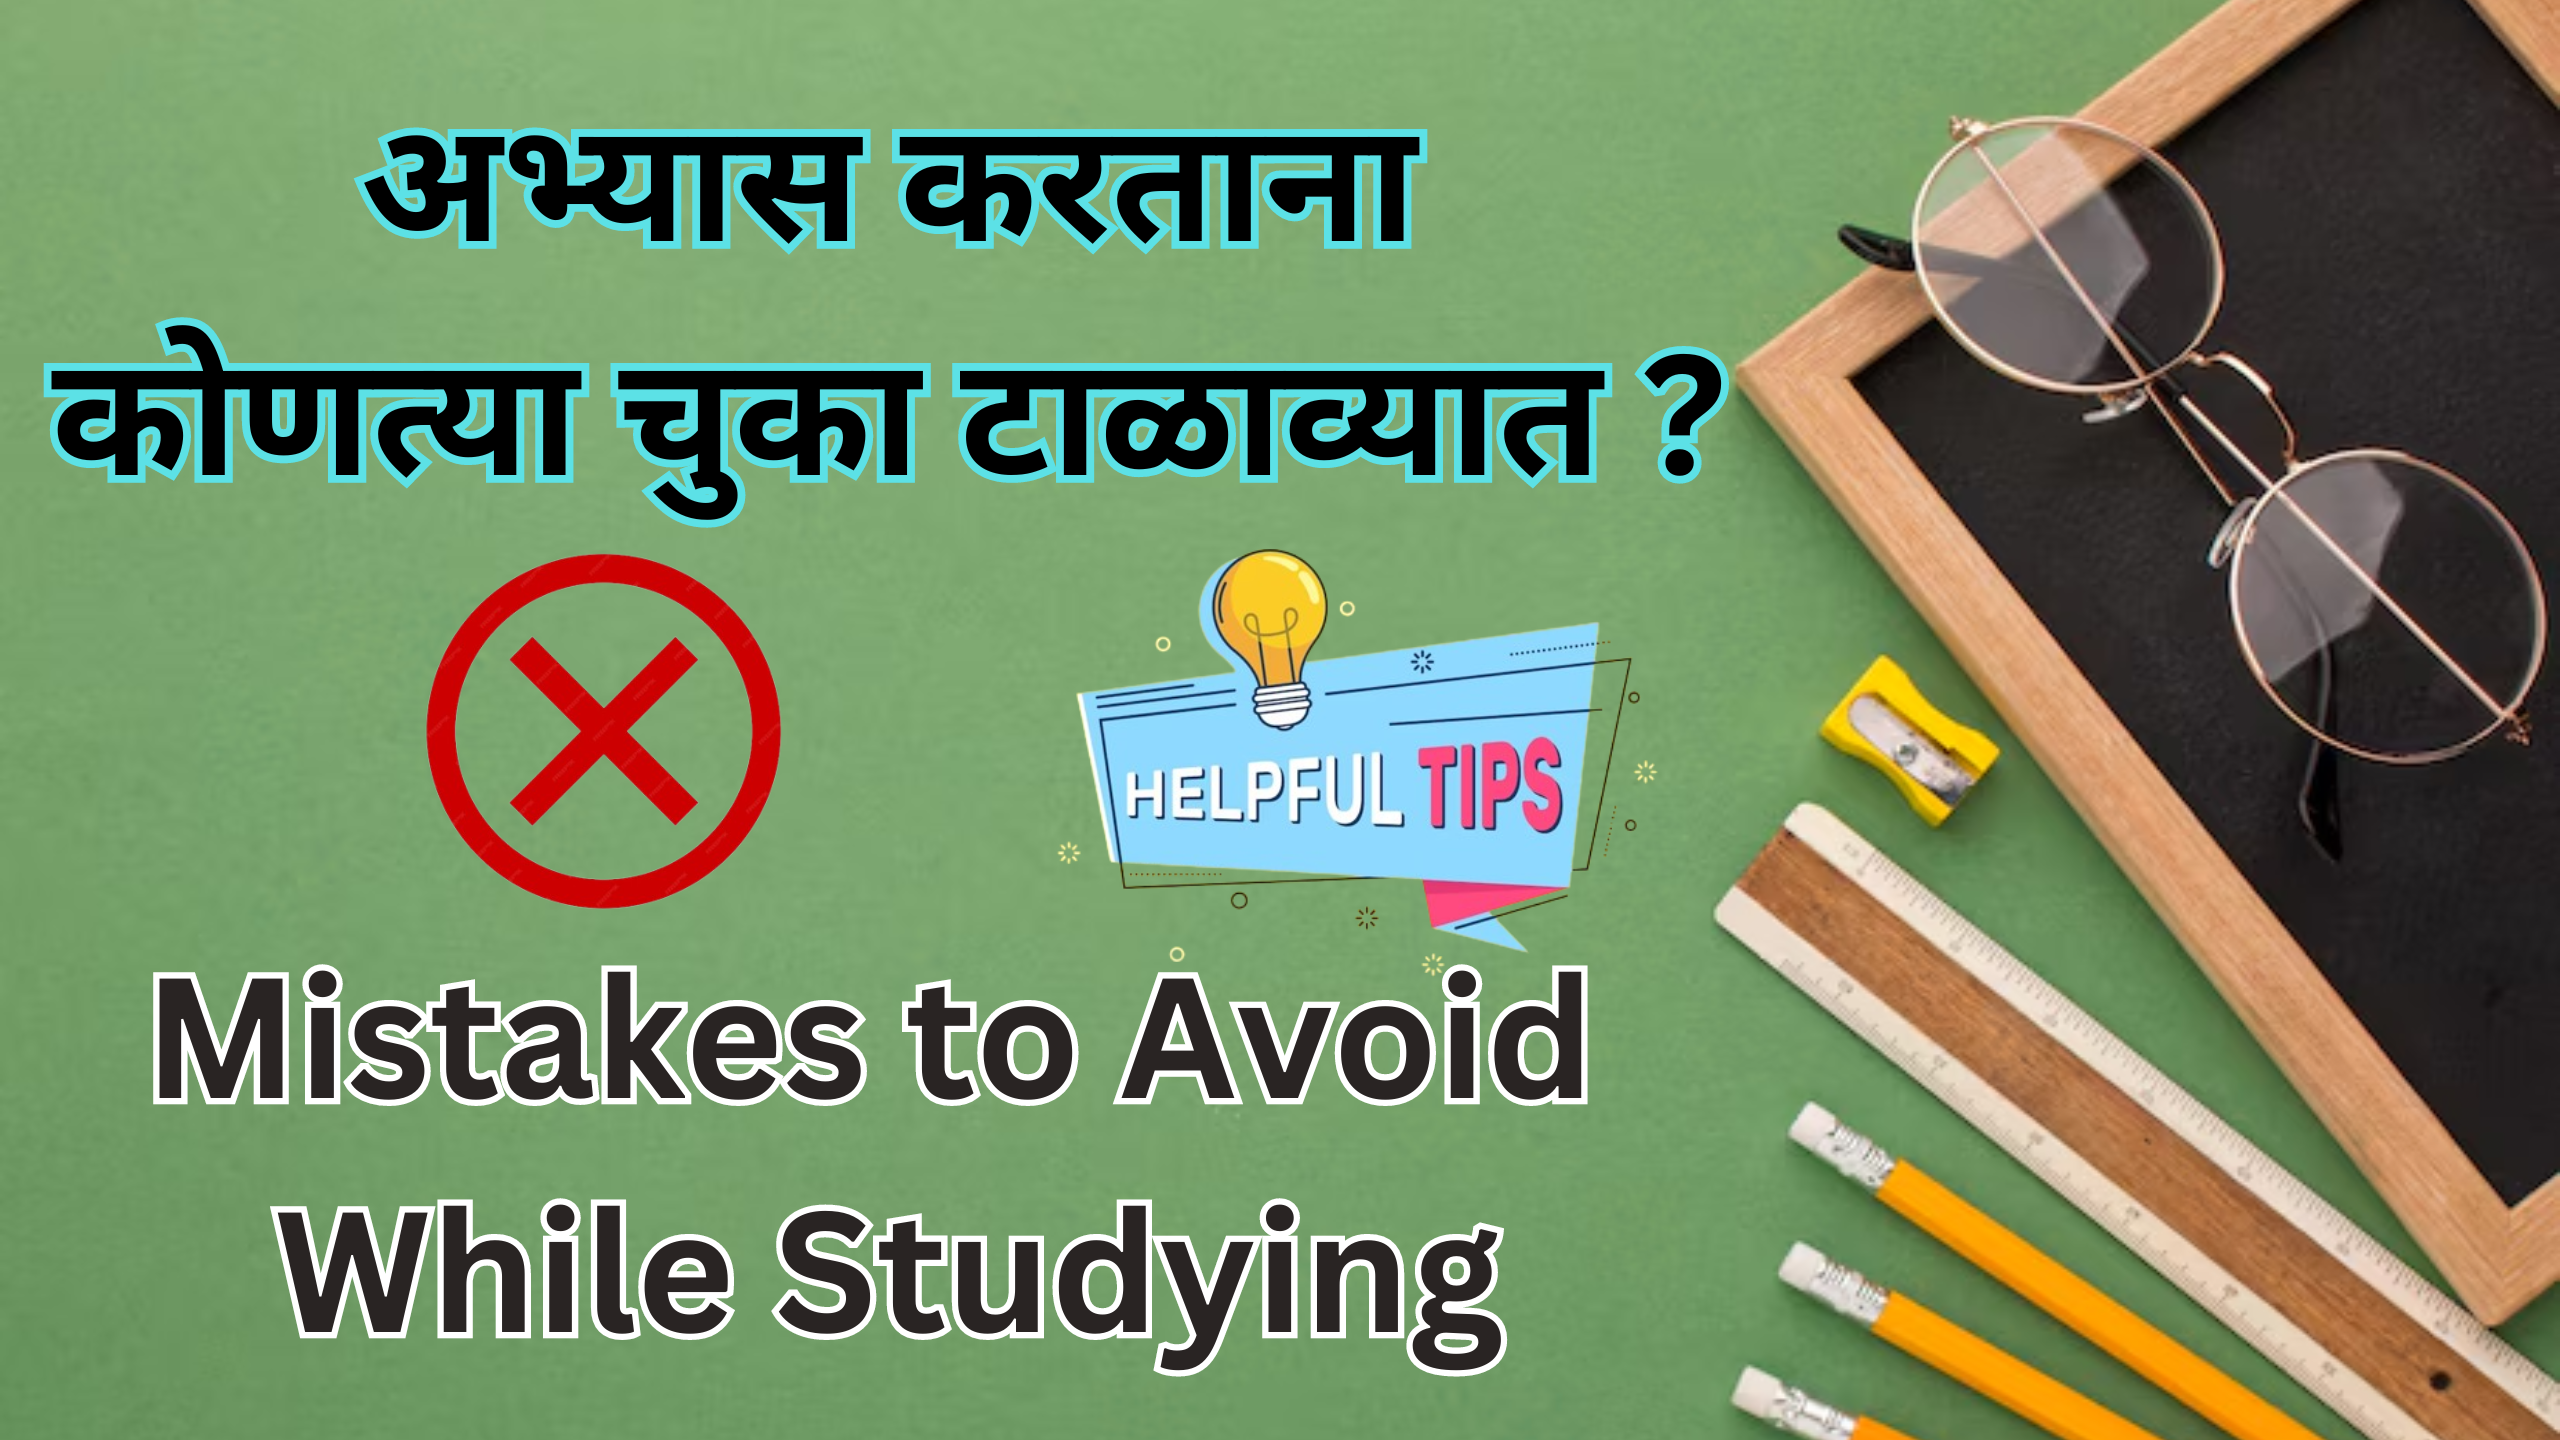 You are currently viewing अभ्यास करताना ह्या चुका टाळा | Avoid Bad Study Habits | Mistakes to Avoid While Studying #studytips.